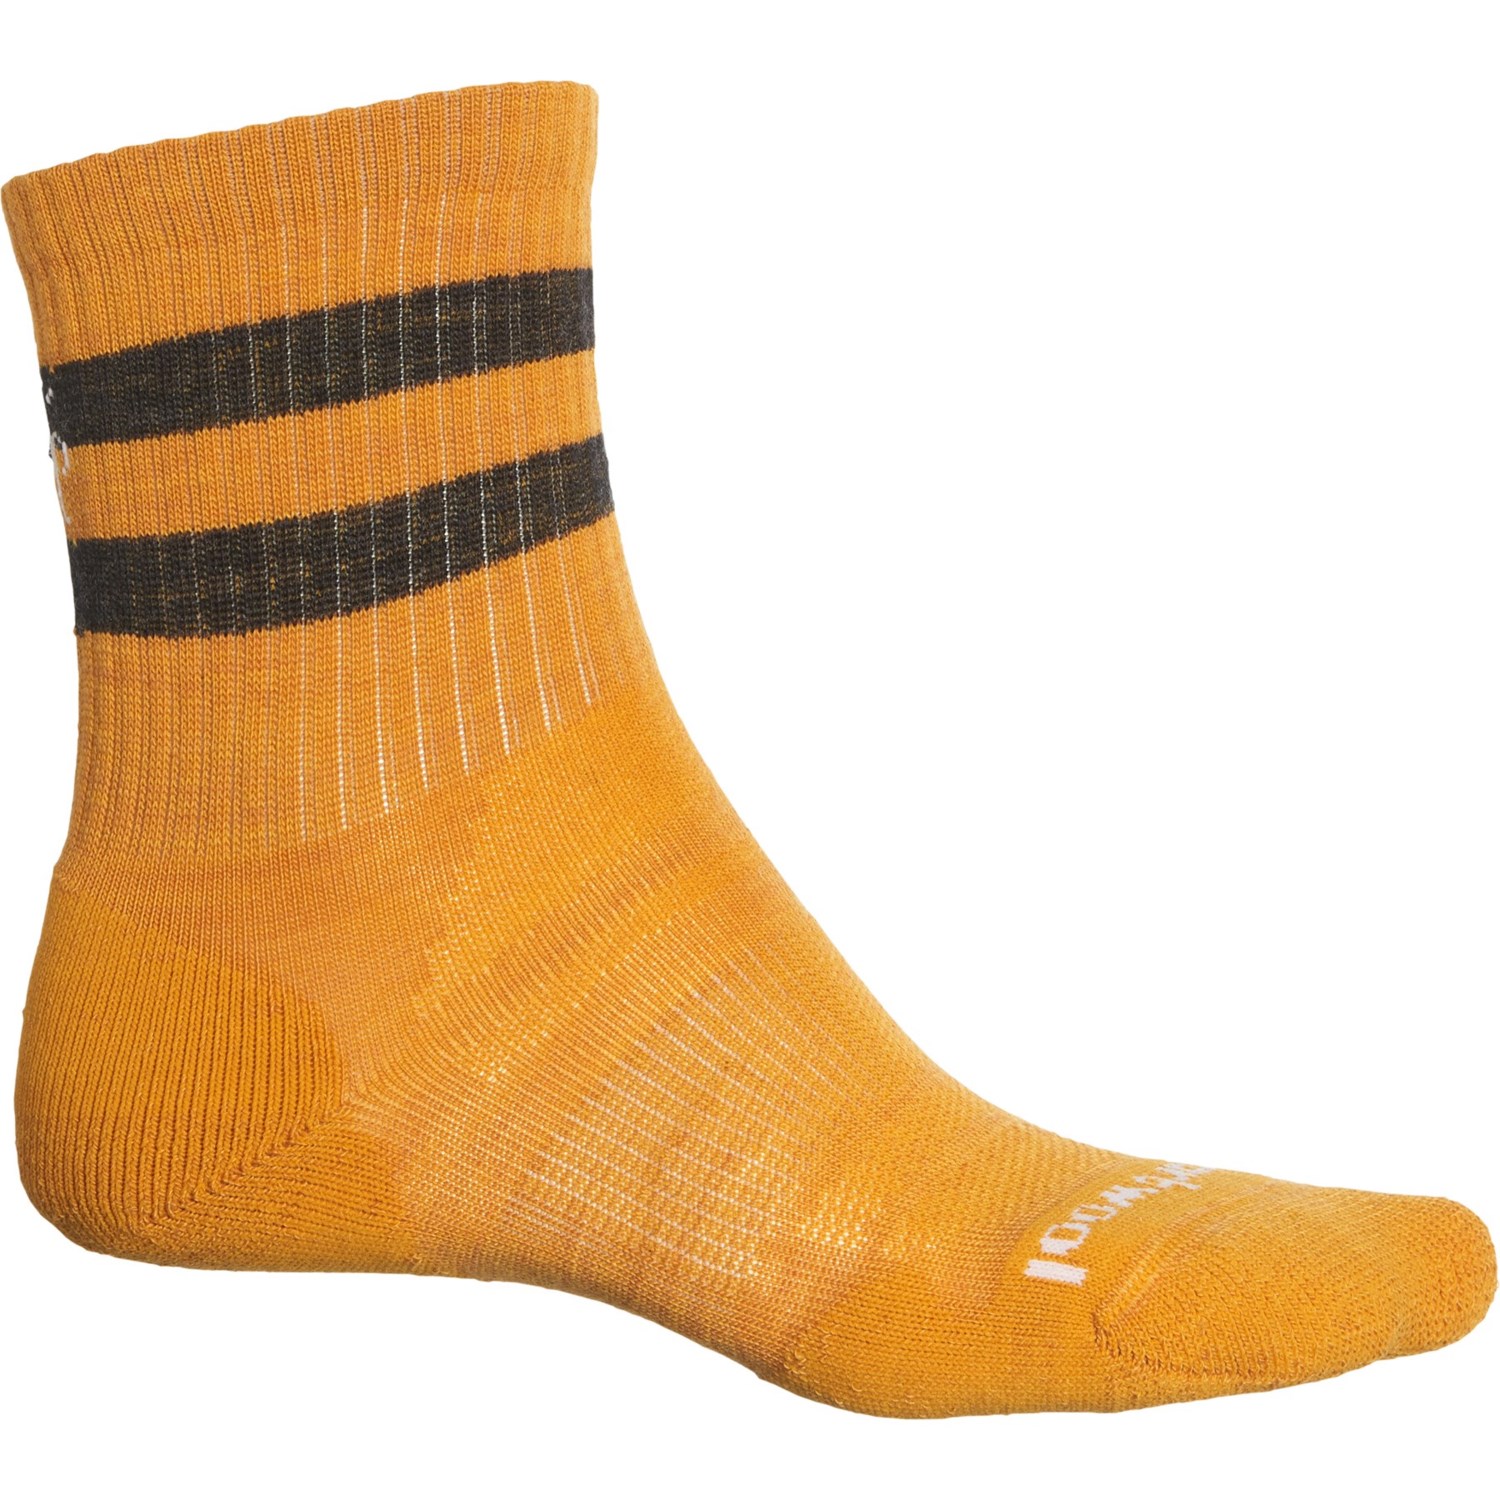 SmartWool Athletic Targeted Cushion Socks - Merino Wool, Crew (For Men and Women)